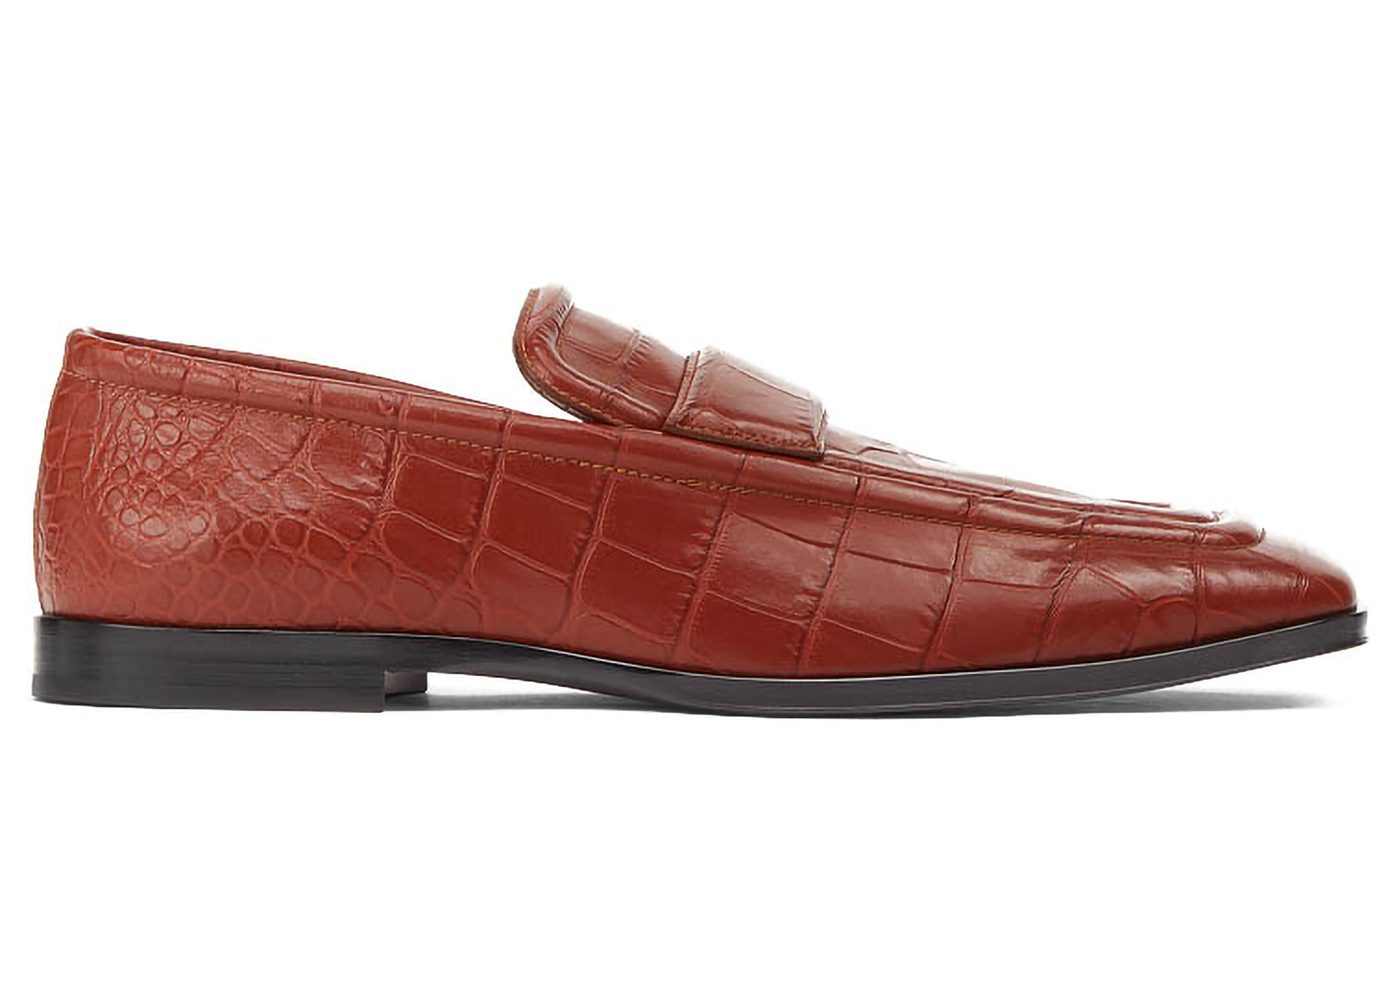 Croc-effect leather loafers